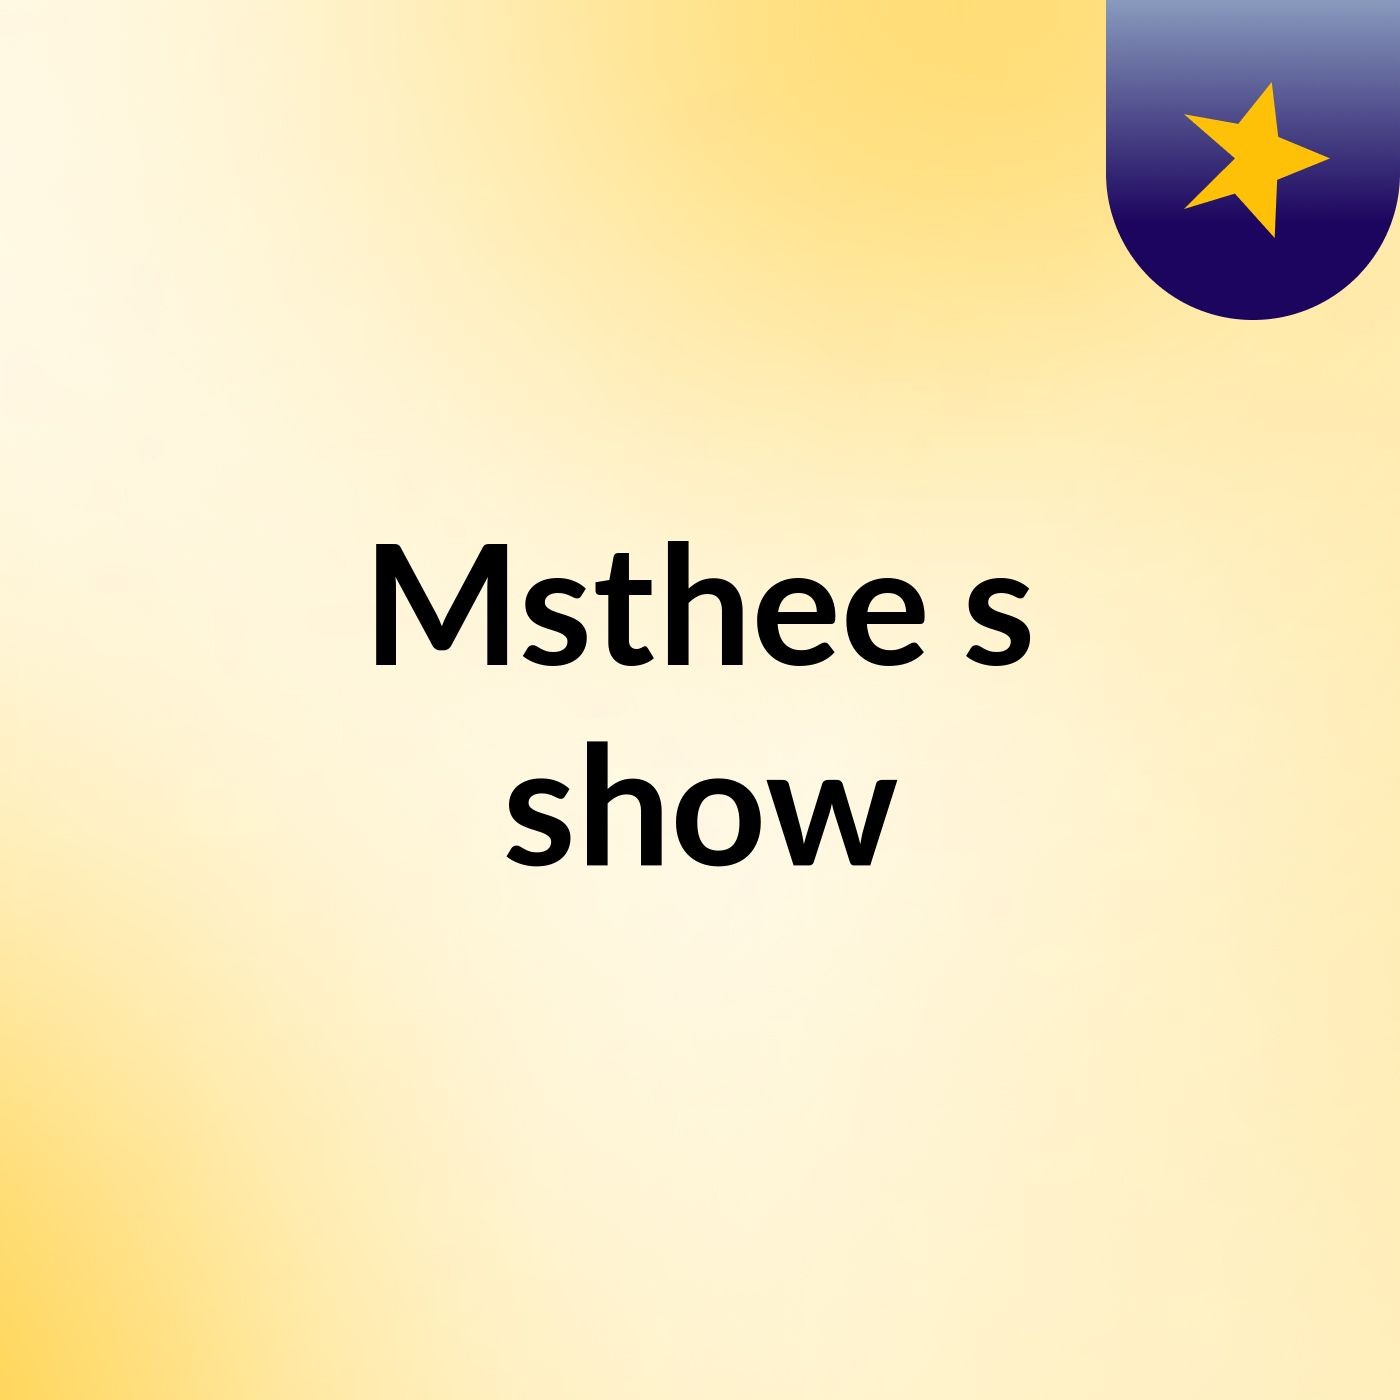 Msthee's show